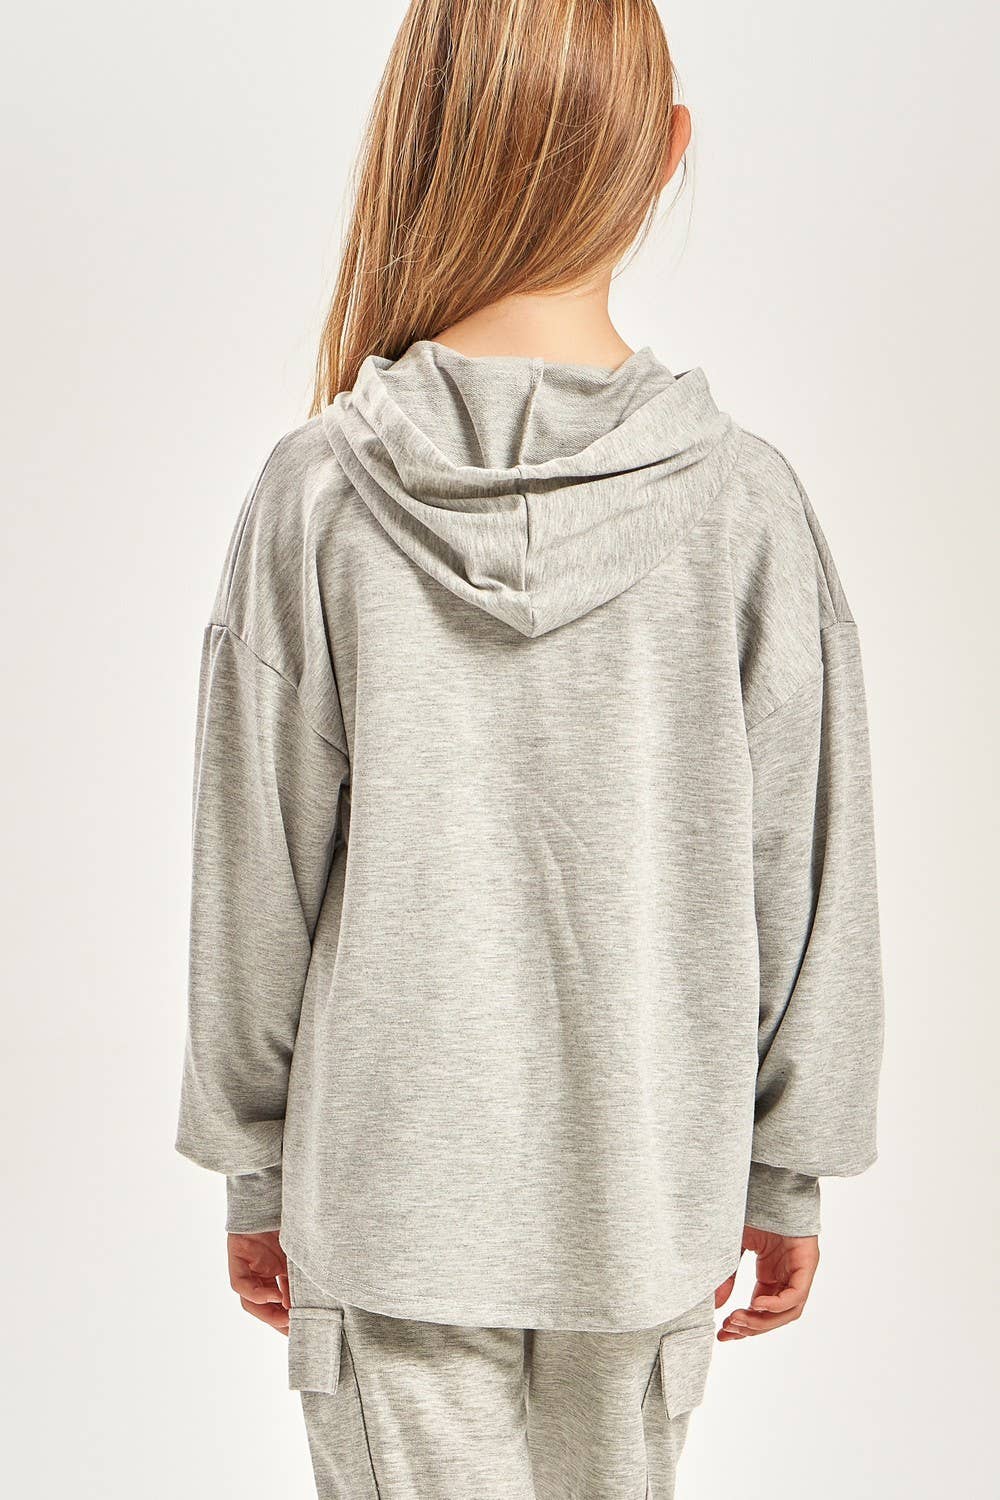 French Terry Hoodie- Gray